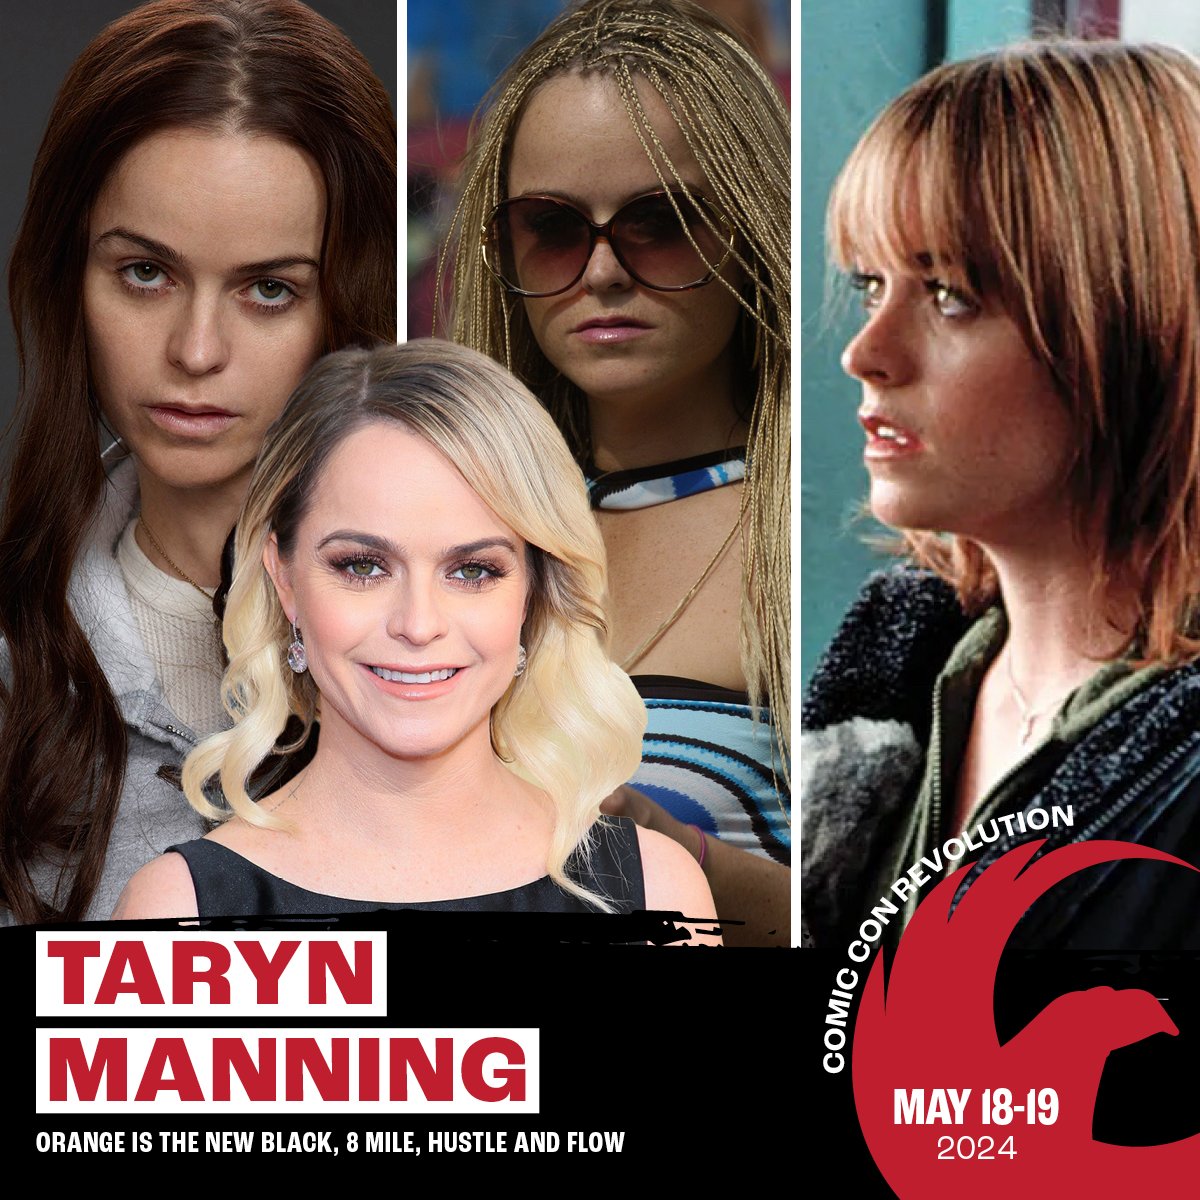 🔥 NEW GUEST ALERT! We've got another great guest addition - Meet #TarynManning from @netflix's @OITNB #8Mile #HustleandFlow & more! Meet her all weekend at #ComicConRevolution! Tix: CCRTix.com #comiccon #inlandempire #ontariocalifornia #socal